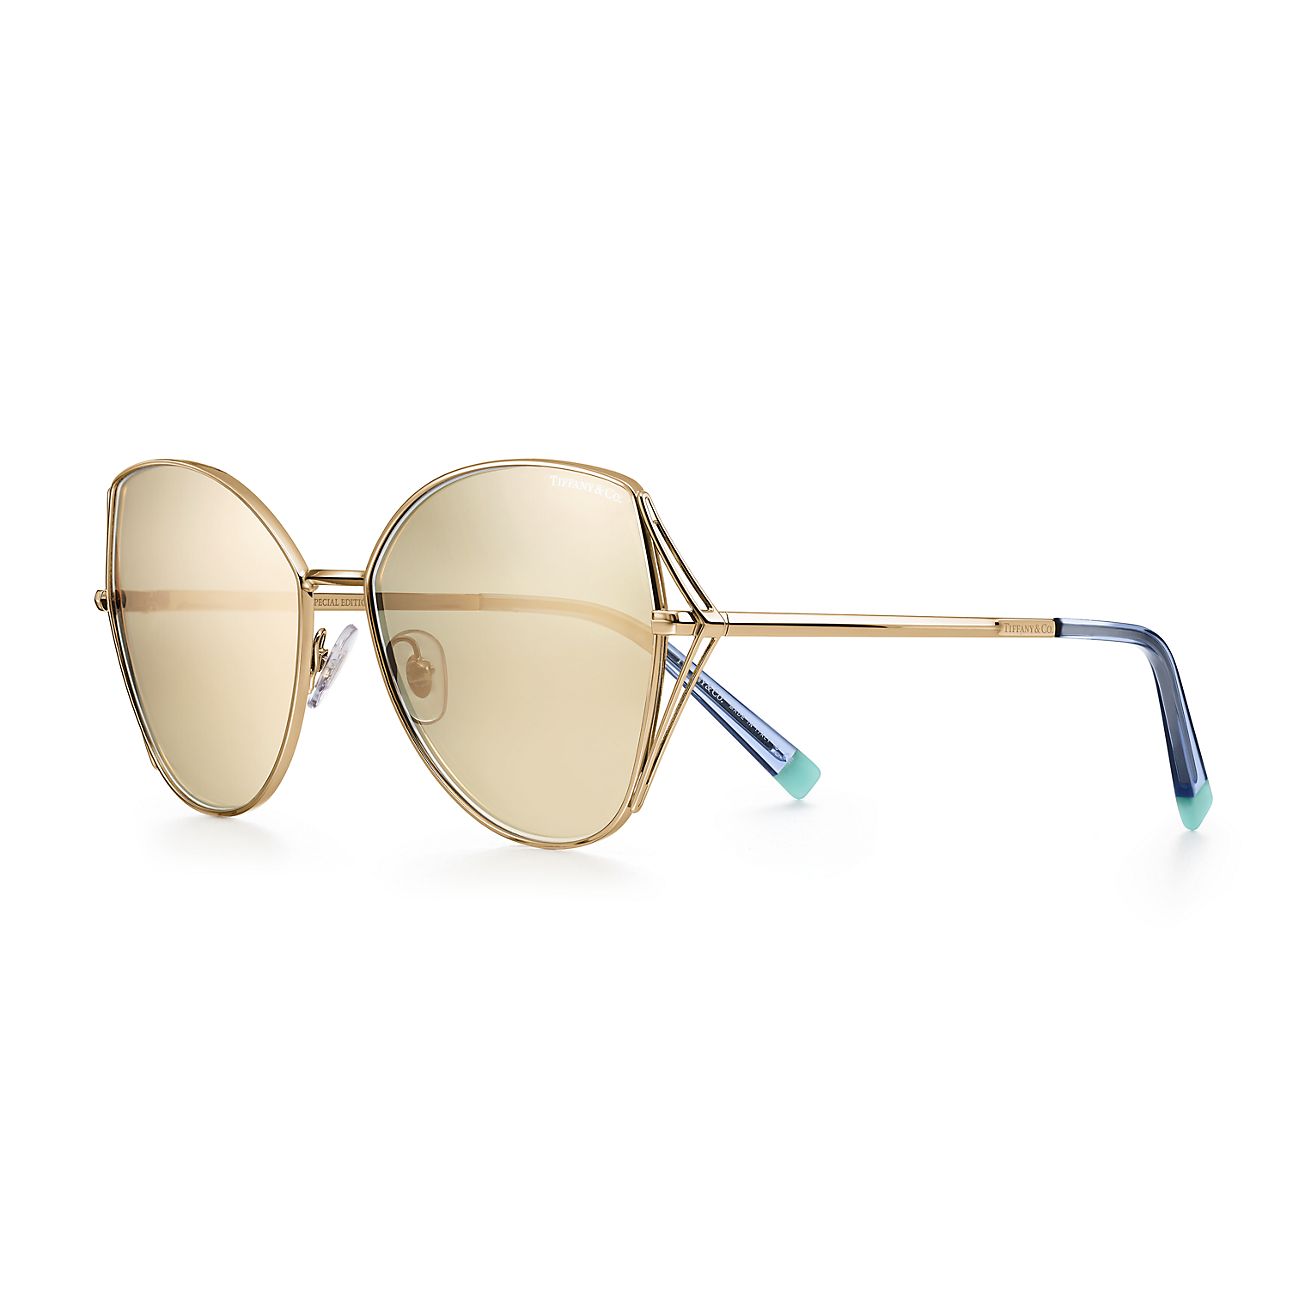 Wheat Leaf butterfly sunglasses in pale 